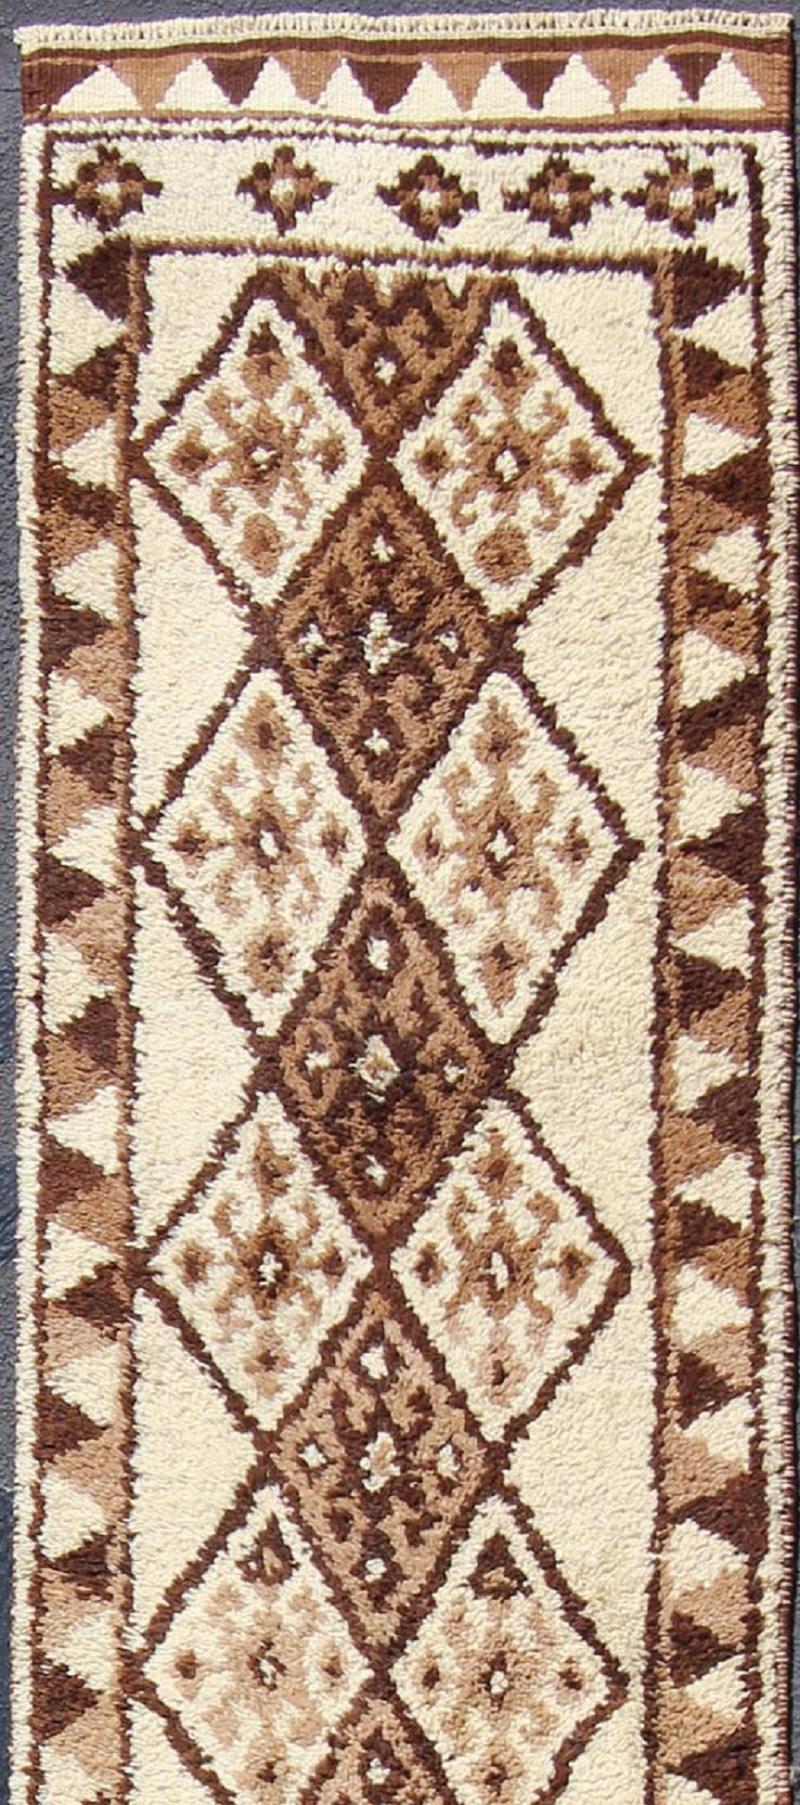 Vintage Turkish Tulu Runner with Diamond Design in Cream, Brown, and Taupe In Excellent Condition For Sale In Atlanta, GA